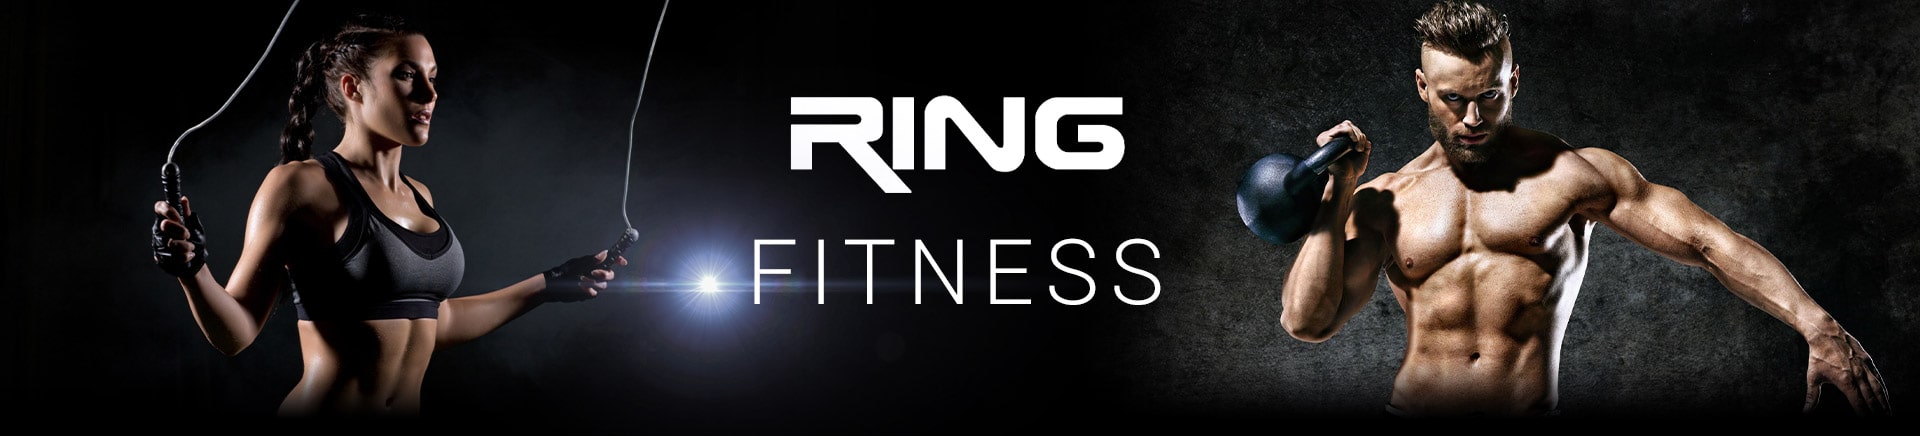 Ring fitness